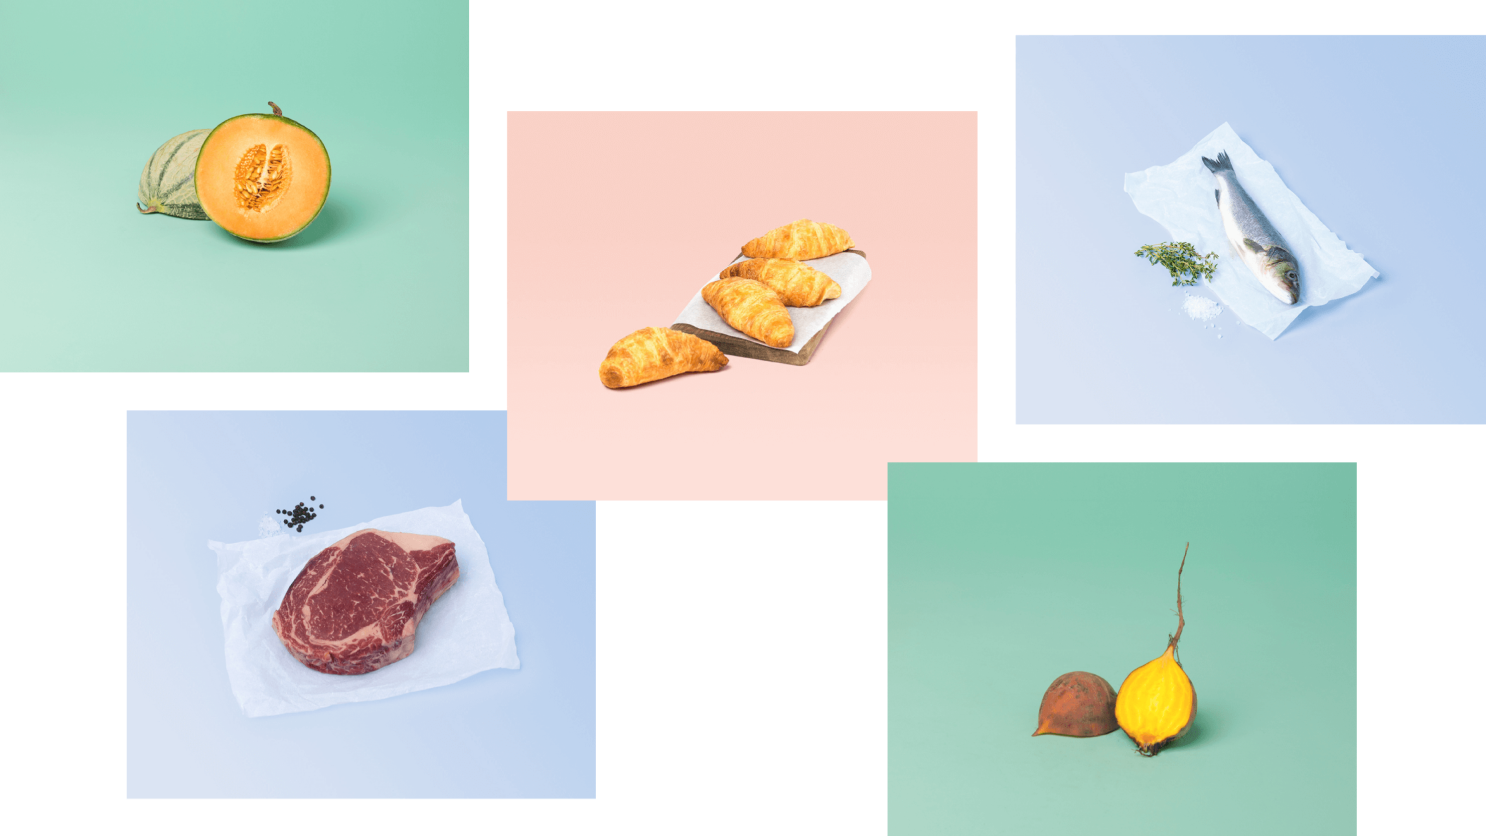 5 Images of food